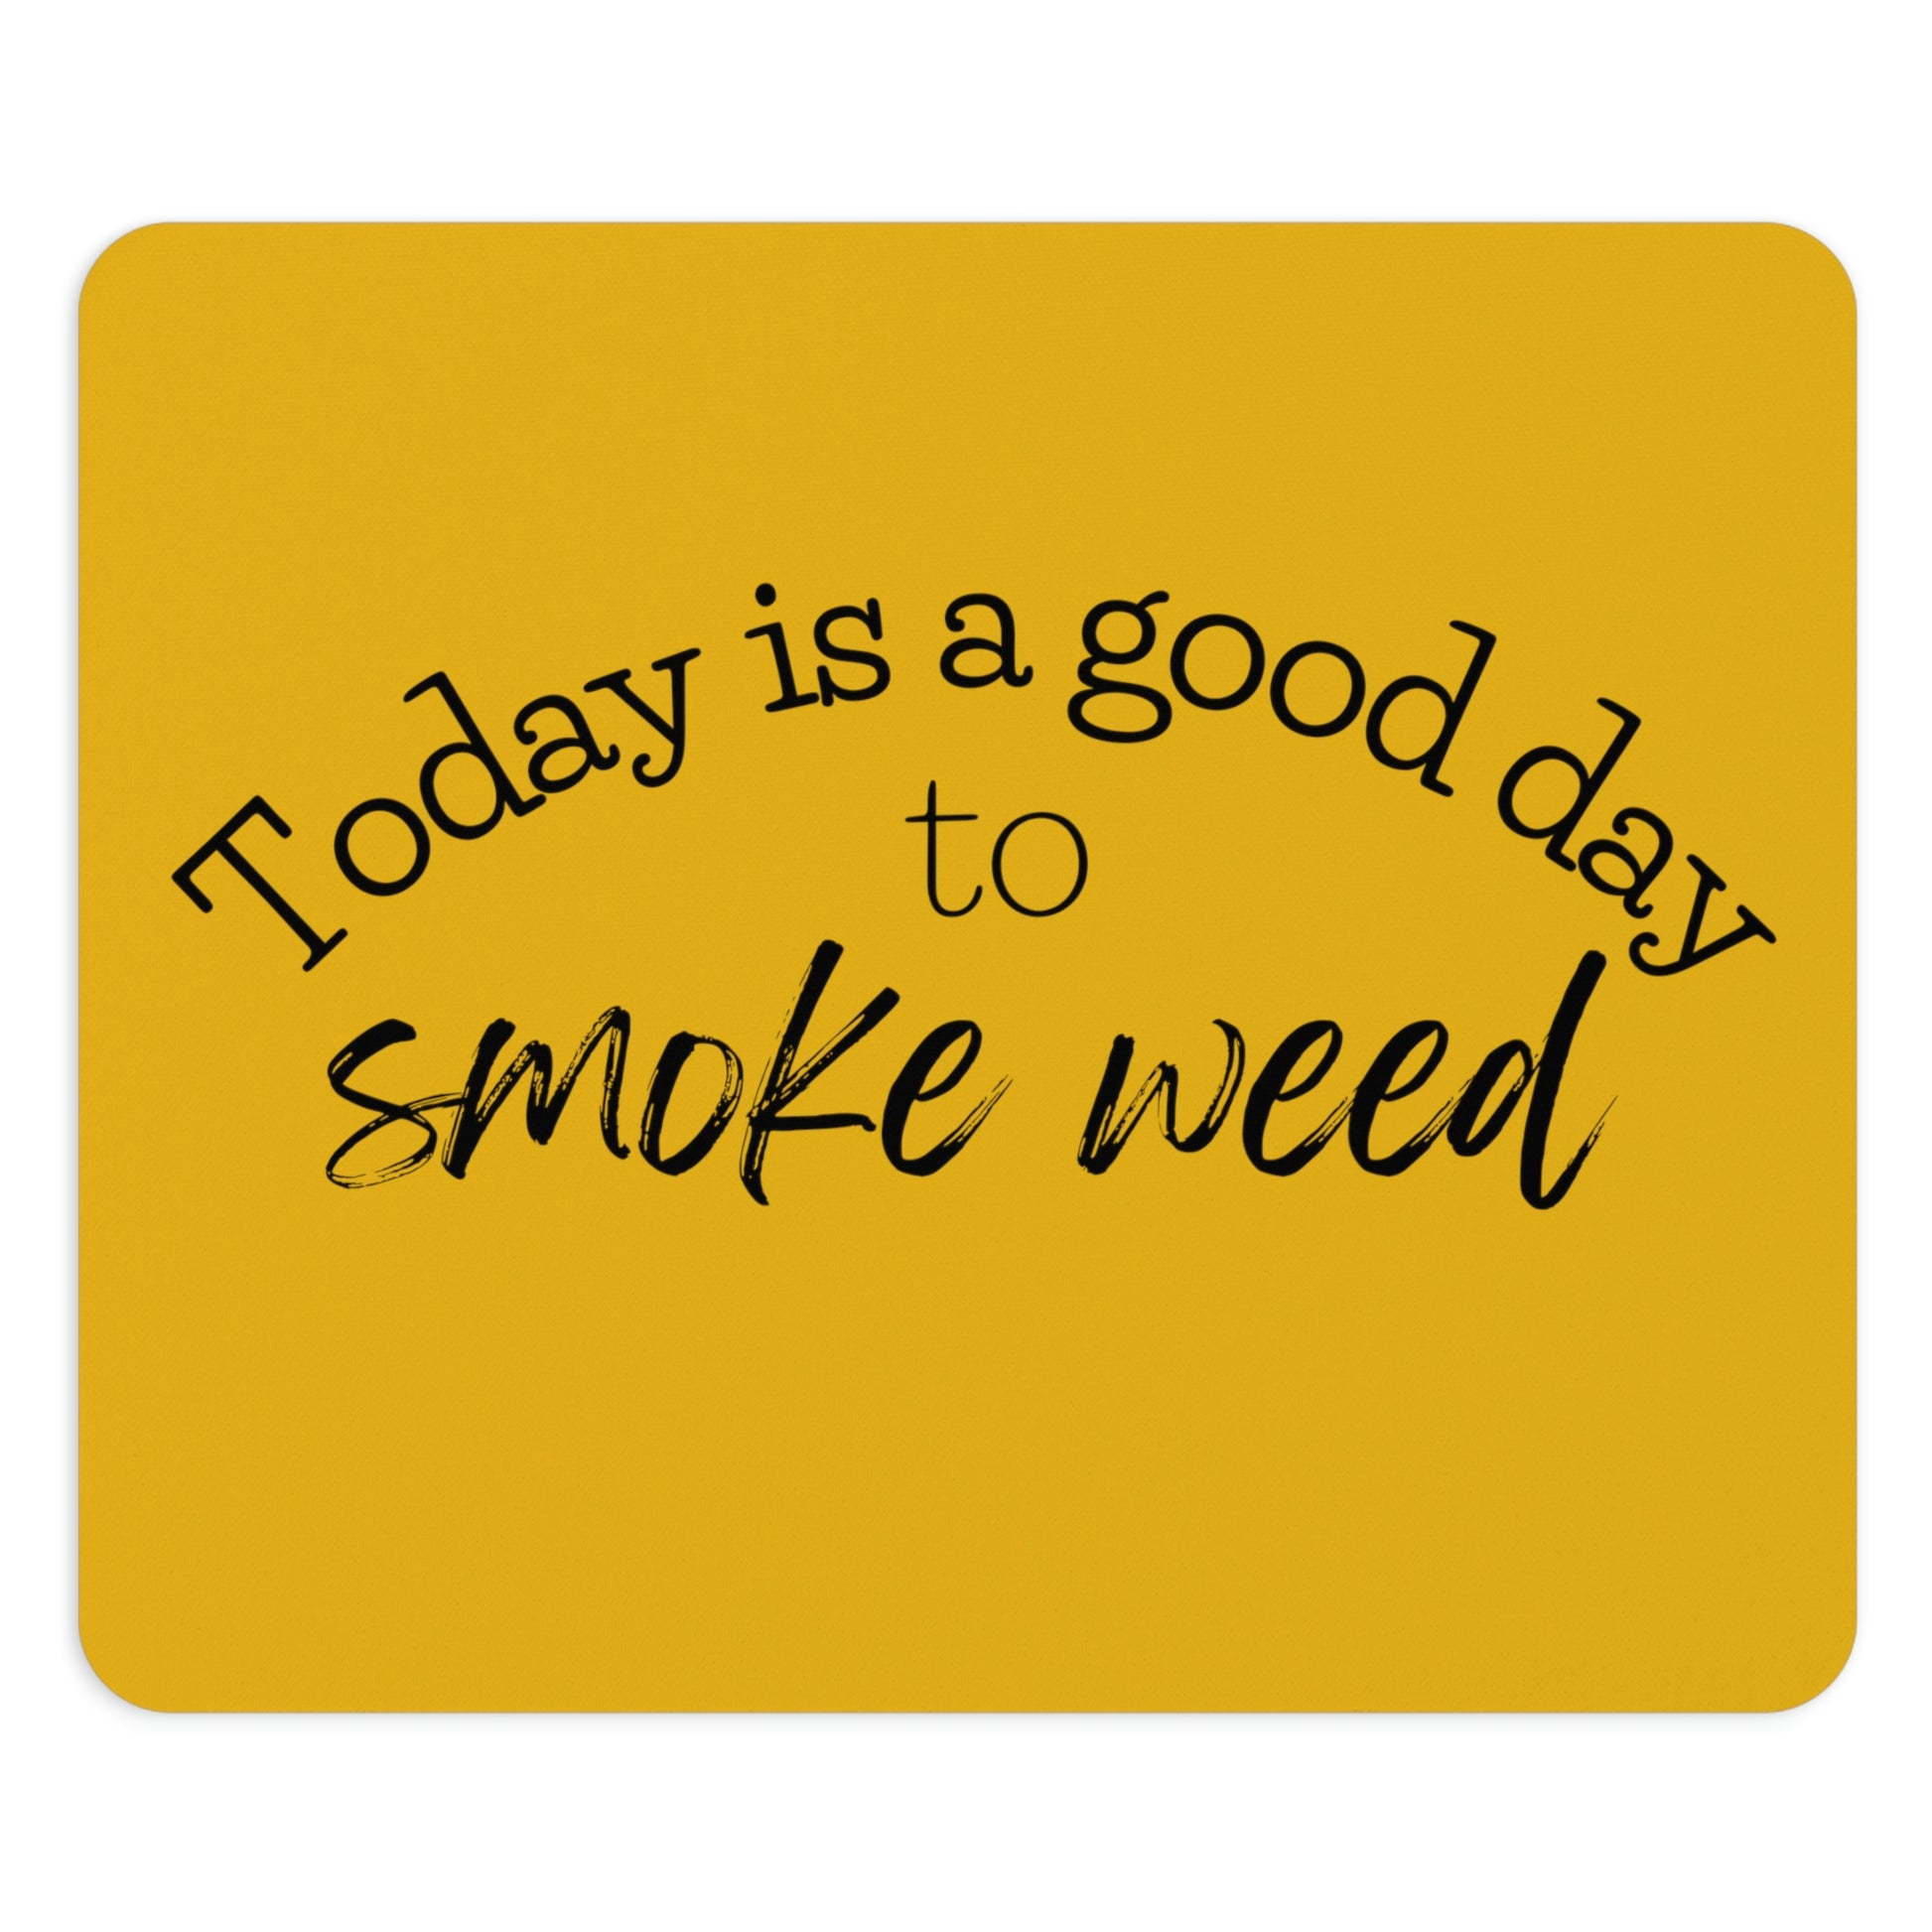 Vibrant yellow background with black cursive text that reads "Today is a Good Day to Smoke Weed" on the Today is a Good Day to Smoke Weed Yellow Mouse Pad.